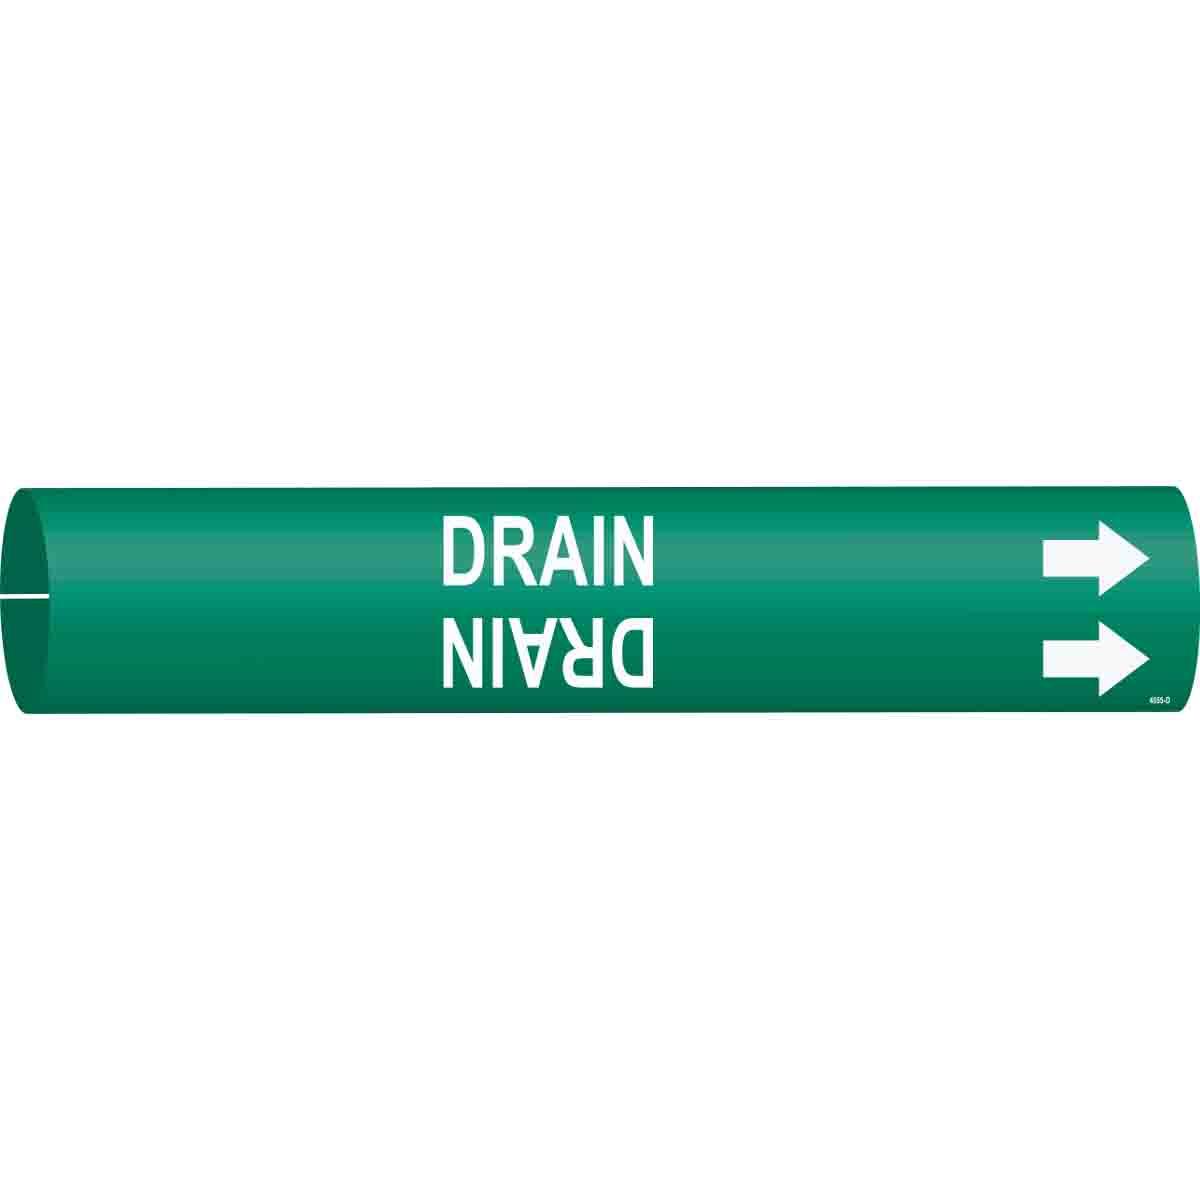 Brady® BradySnap-On™ 4055-C C Style Pipe and Valve Marker, DRAIN with Right Arrow Symbol Legend, White on Green, Fits Pipe Dia: 2-1/2 to 3-7/8 in, 2 in H x 2 in W, B-915 Plastic, Snap-On Mount